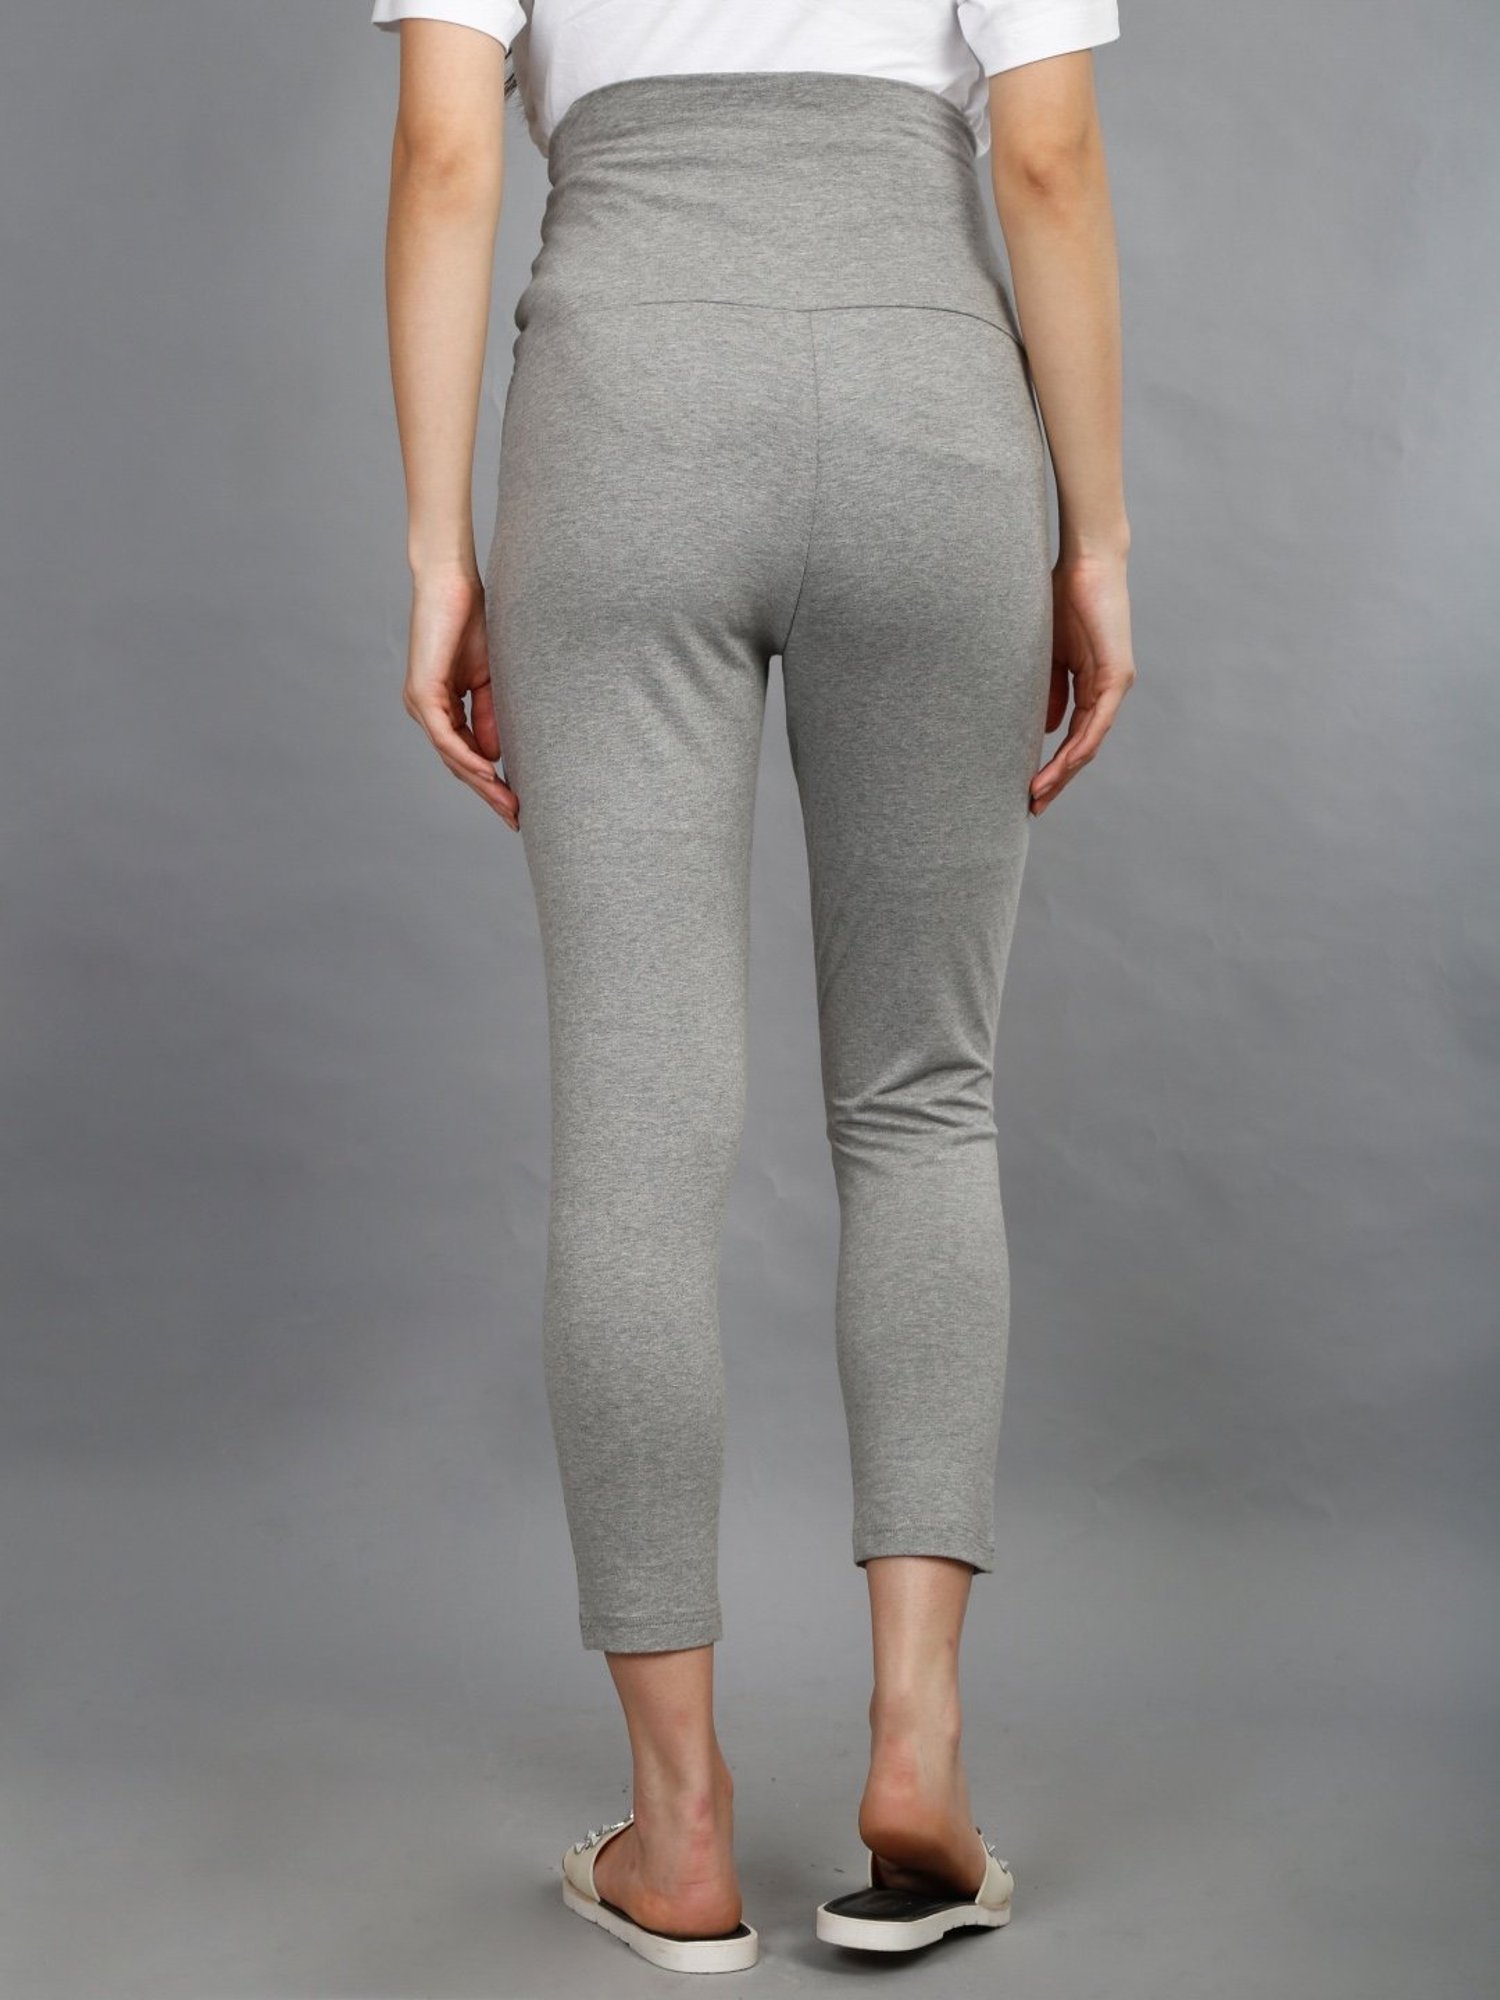 Buy The Mom Store Grey Relaxed Fit Leggings for Women Online @ Tata CLiQ